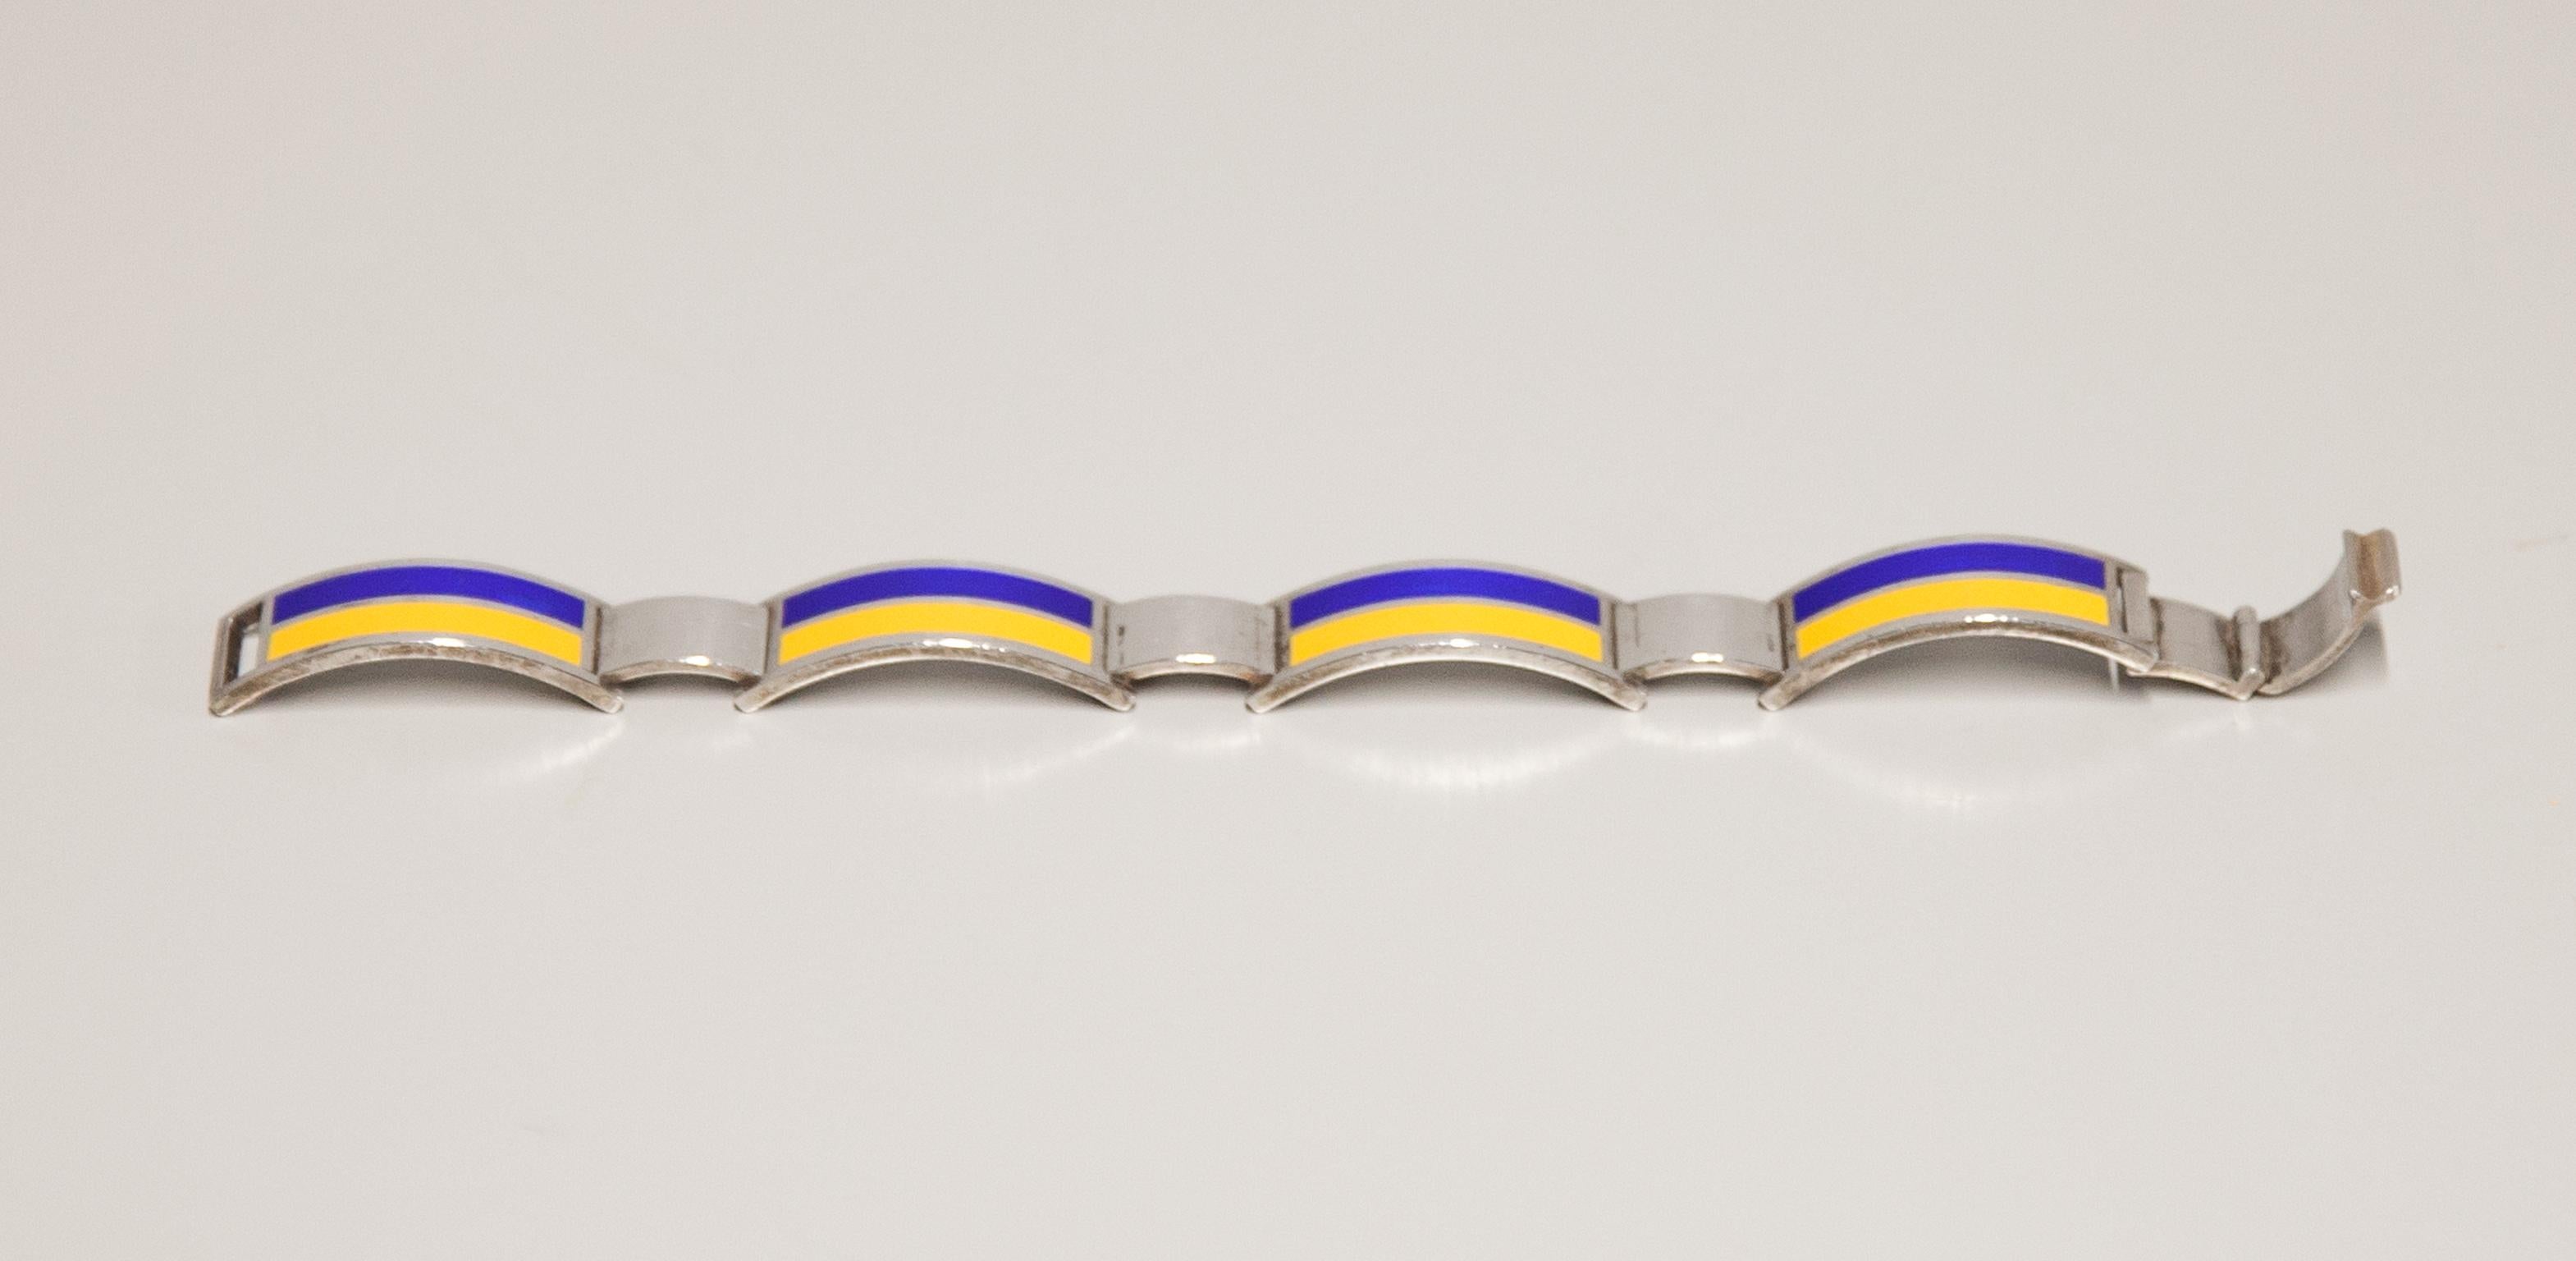 Elegant bracelet in 925 sterling silver and blue and yellow enamel inclusions like the Ukraine flag, stamp with Gucci and the silver mark and designed by Antonio Fallaci.